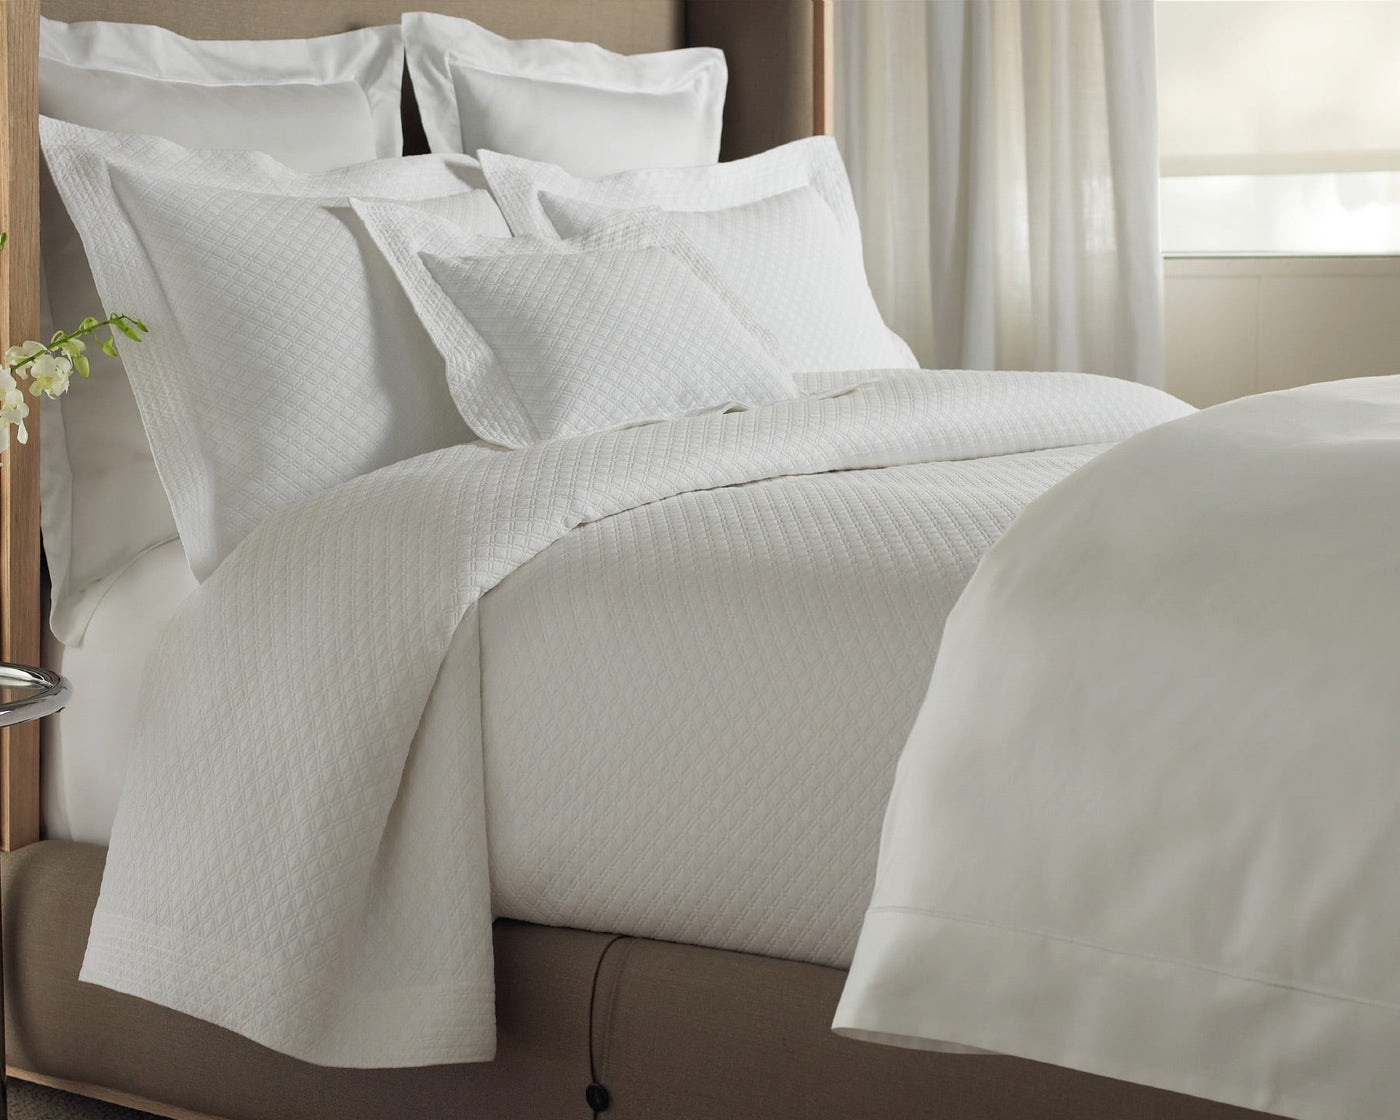 100% cotton Alyssa coverlet and coordinating shams in white